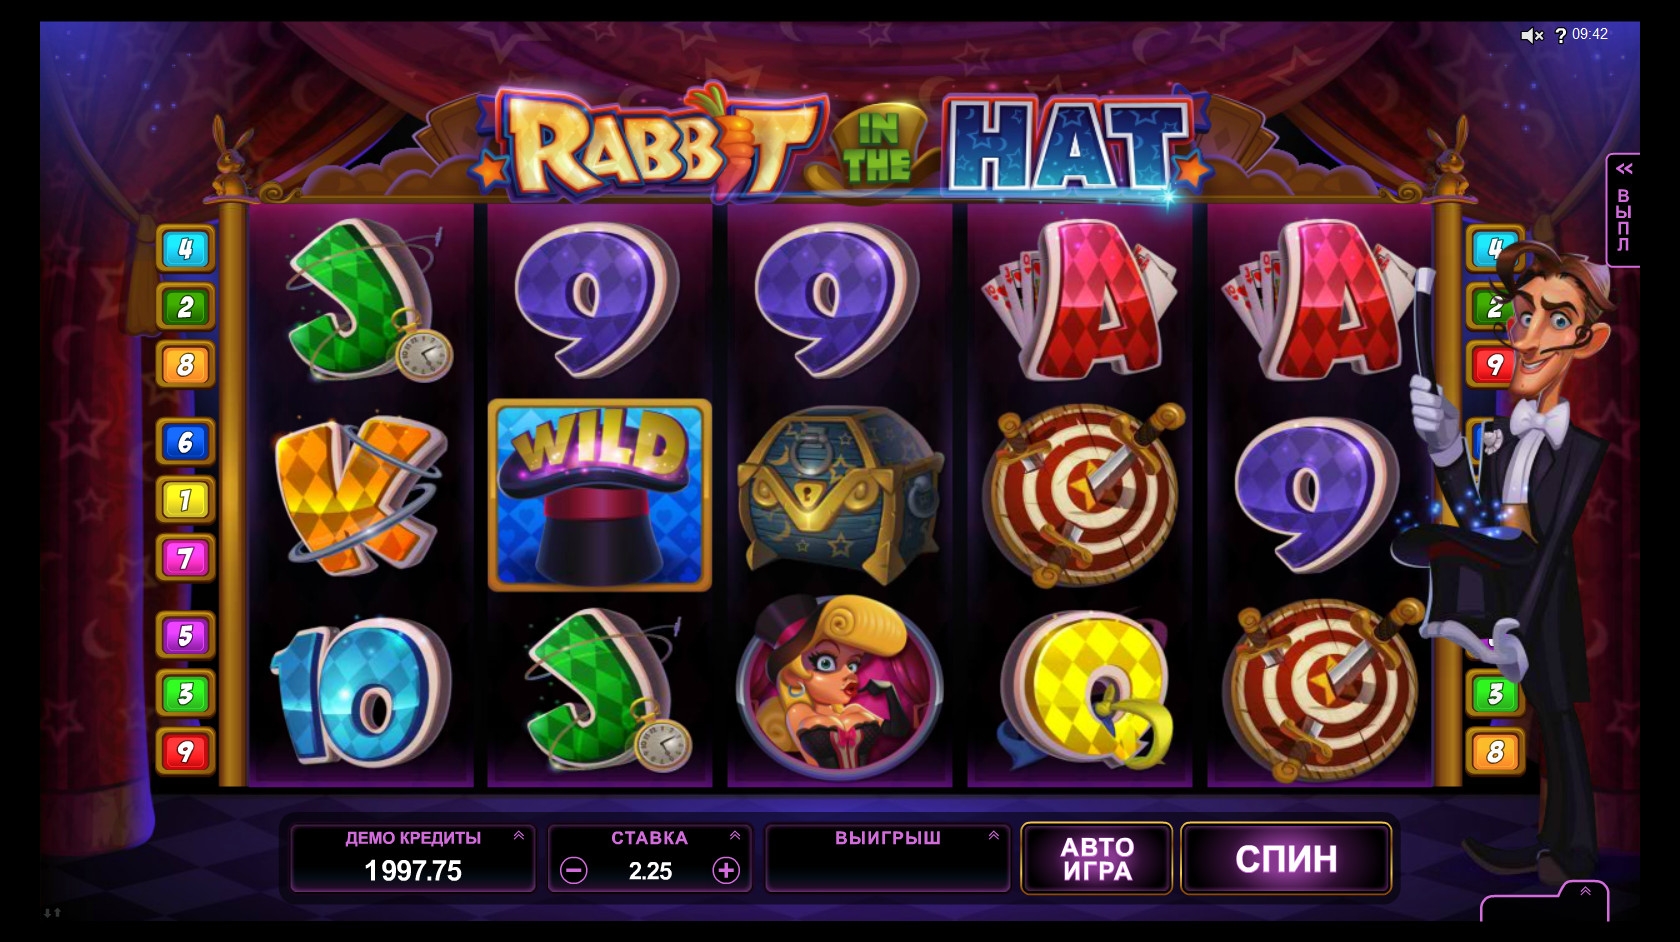 Rabbit in the Hat (Rabbit in the Hat) from category Slots